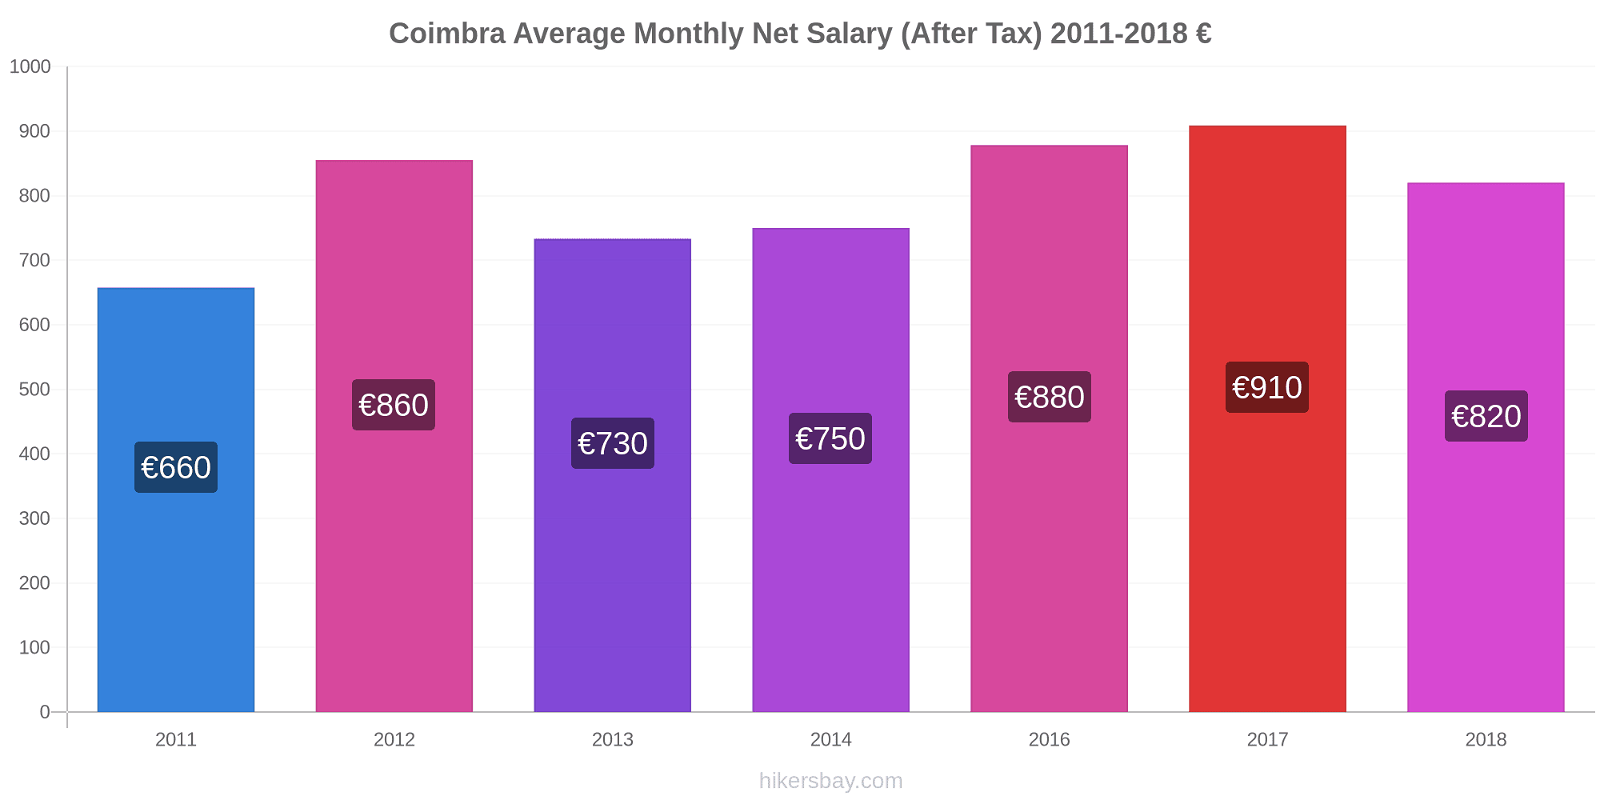 Coimbra price changes Average Monthly Net Salary (After Tax) hikersbay.com